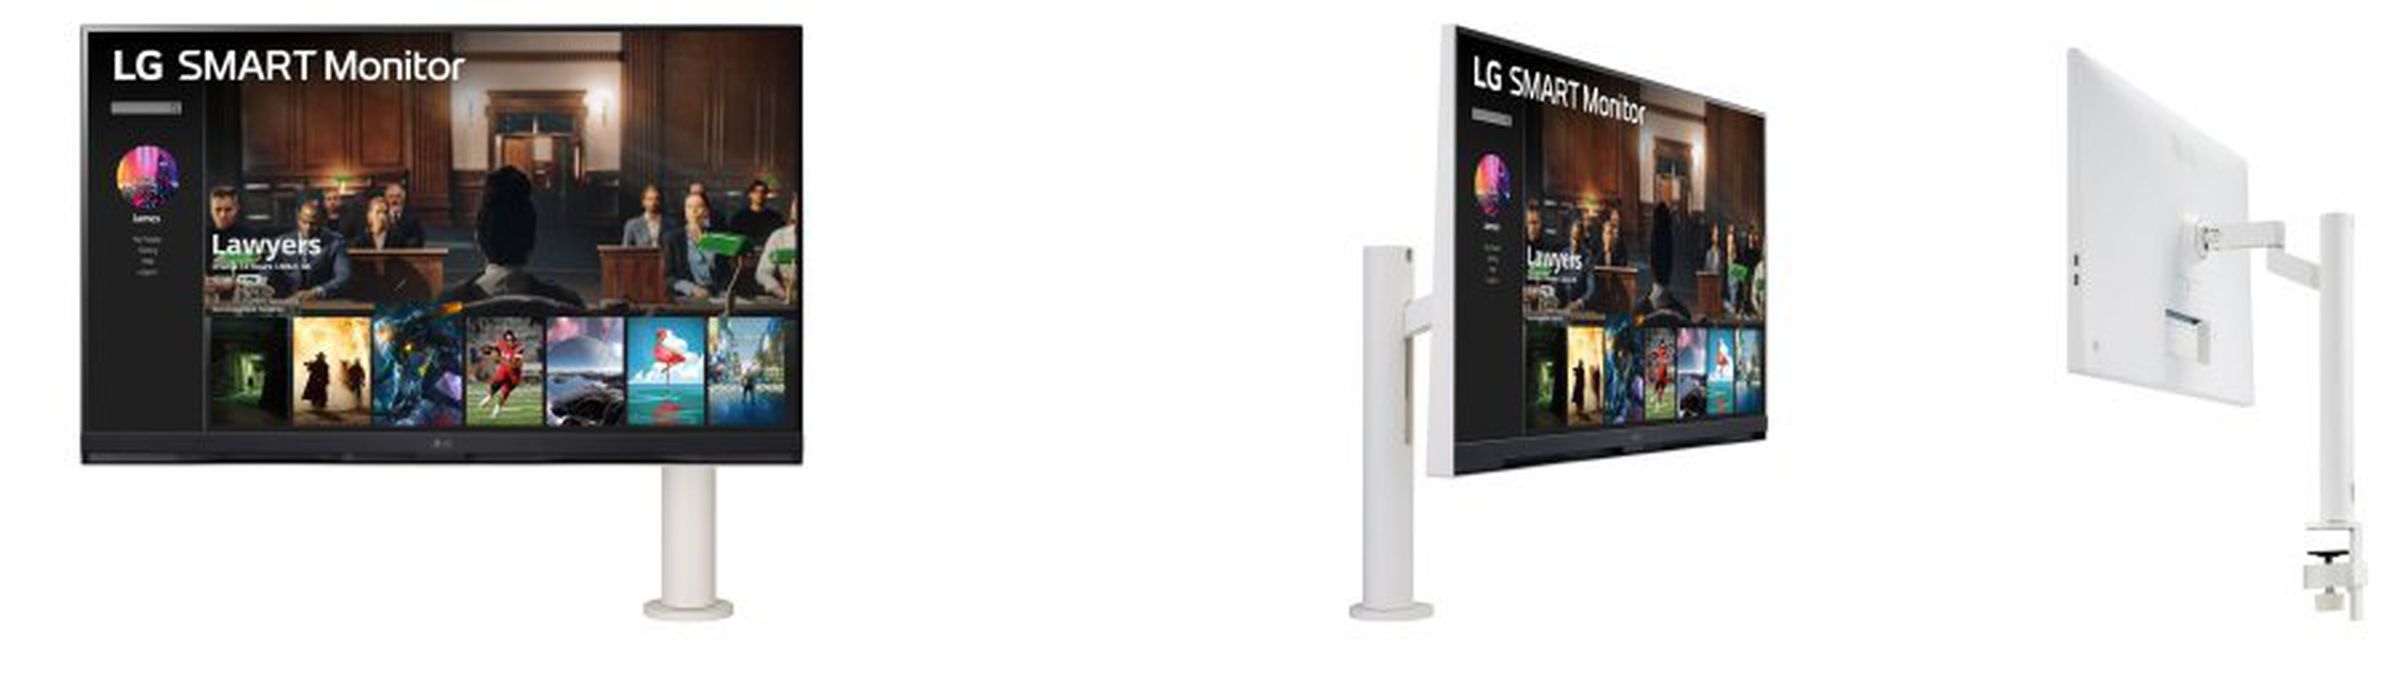 All the angles for the LG Smart Monitor.